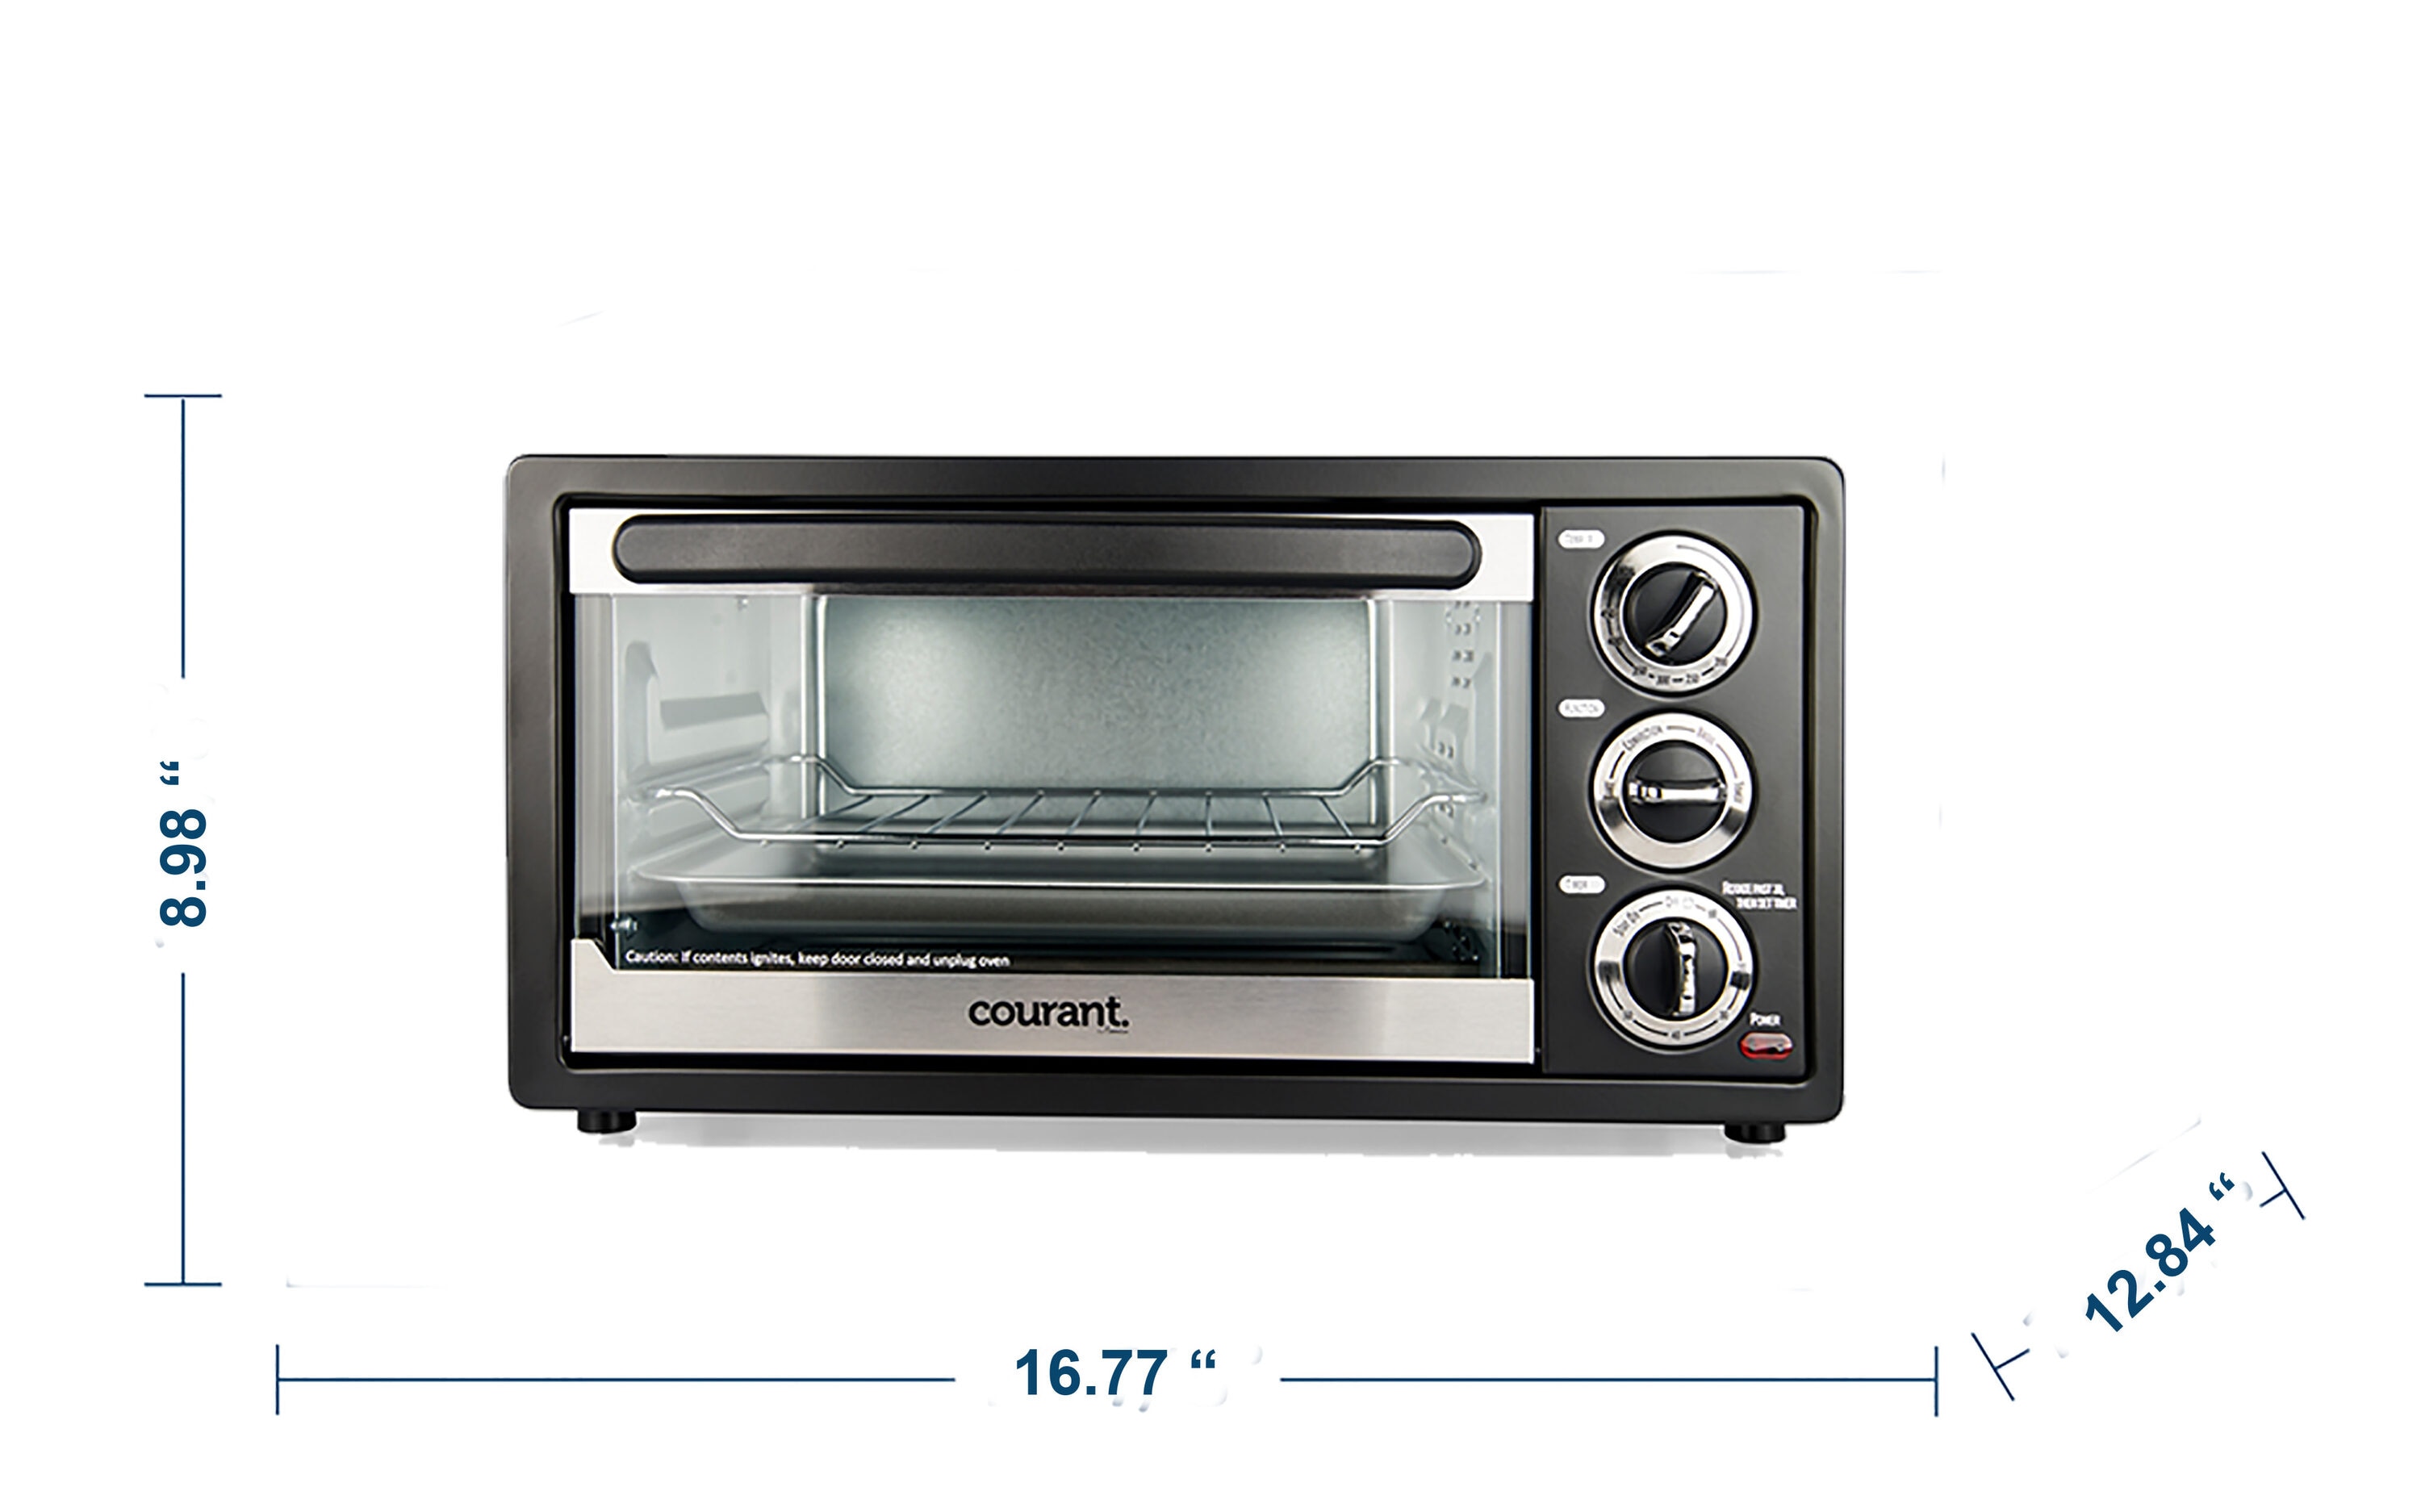 Daewoo DOT1665 220 Volt Extra Large Convection Toaster Oven